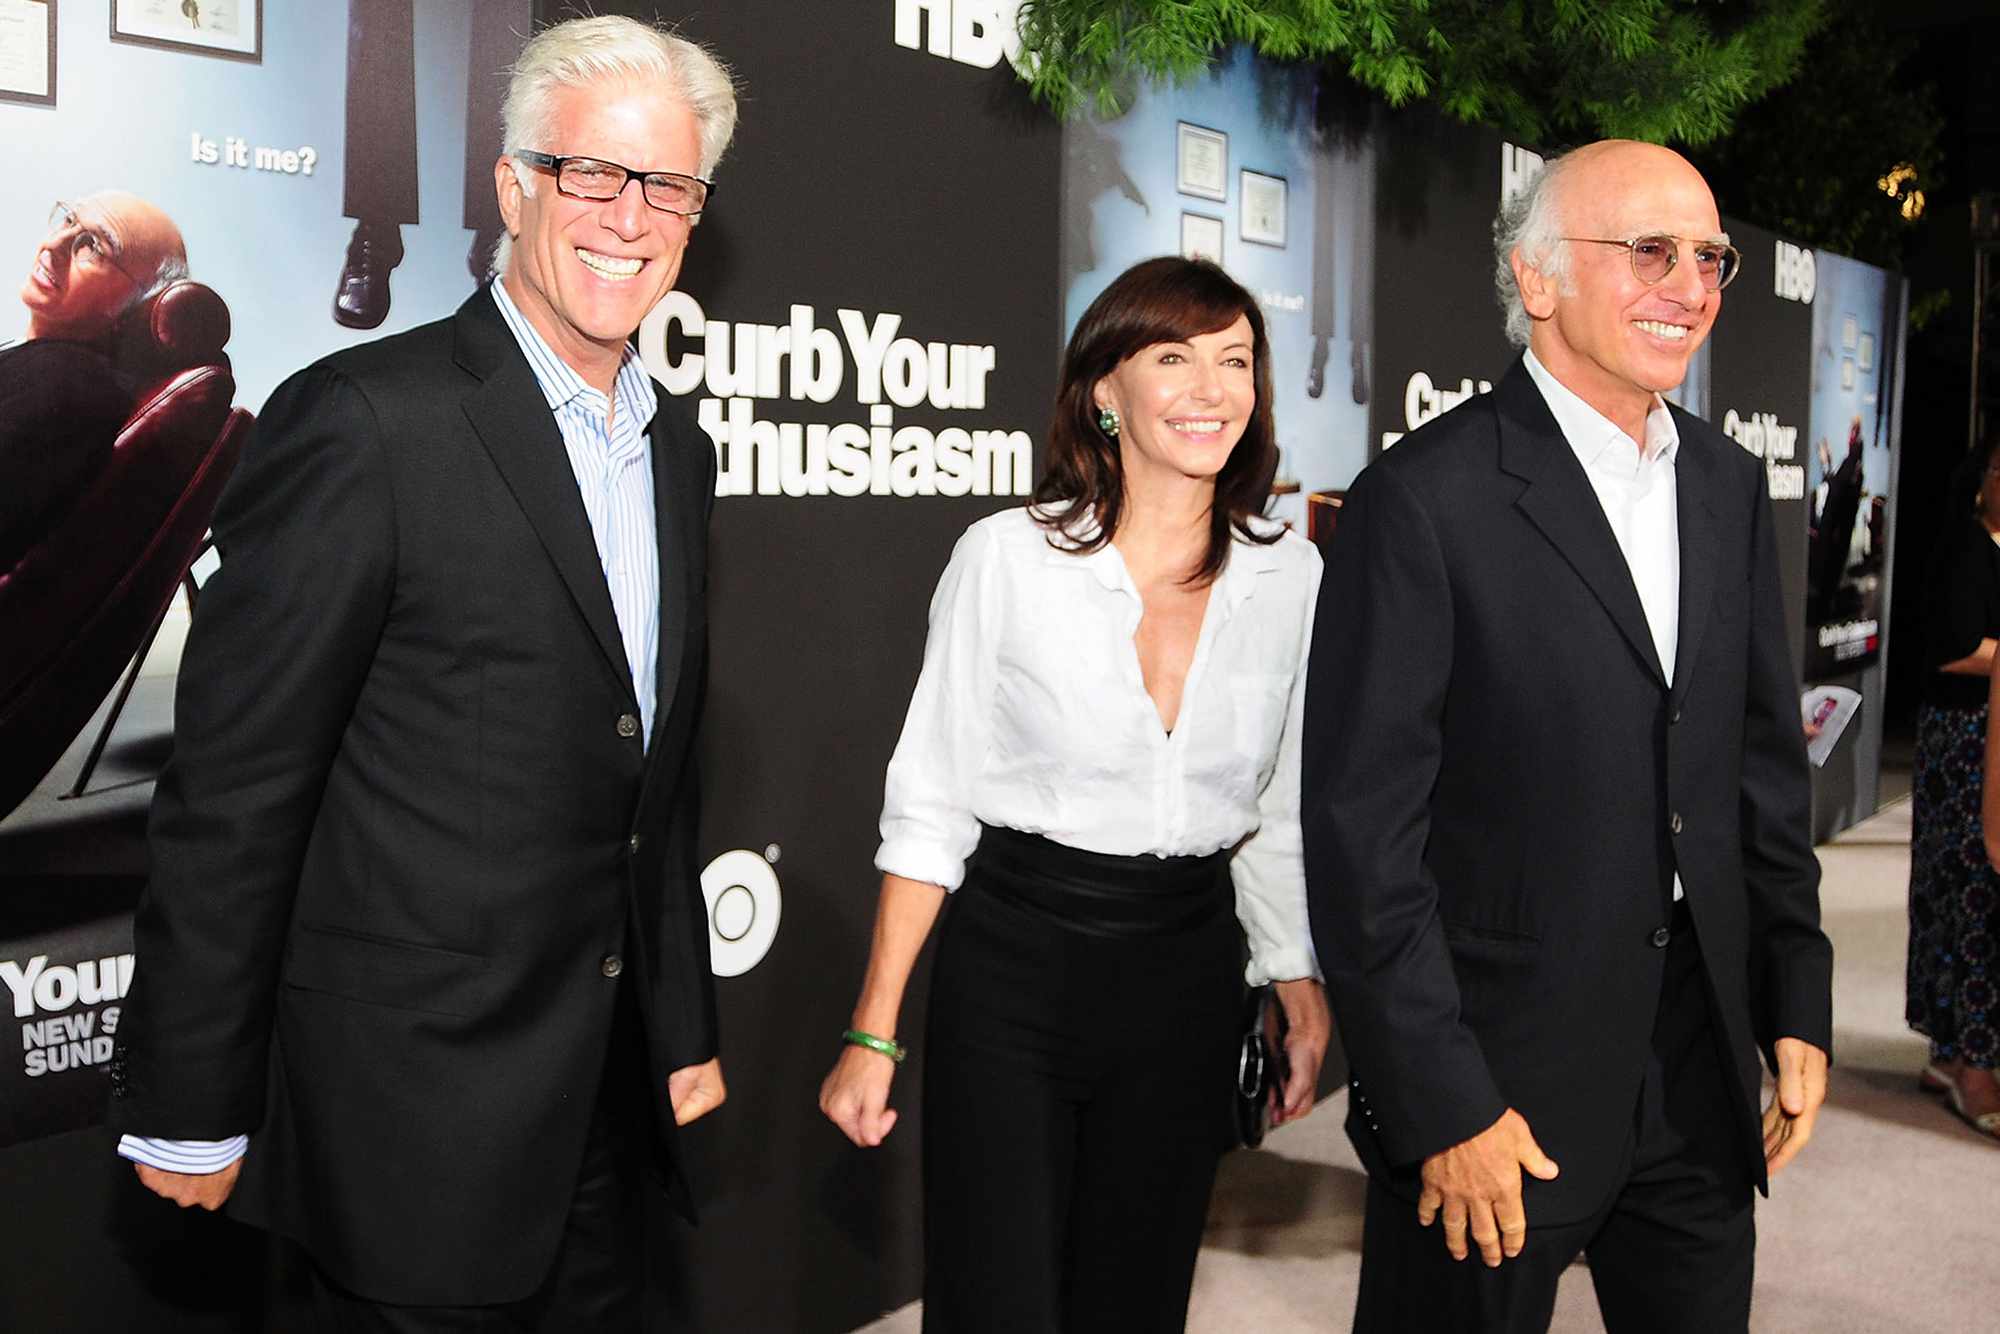 Ted Danson, Mary Steenburgen and Larry David arrive at the Paramount Theater on the Paramount Studios lot on September 15, 2009 in Hollywood, California. HBO's Premiere Of "Curb Your Enthusiasm"